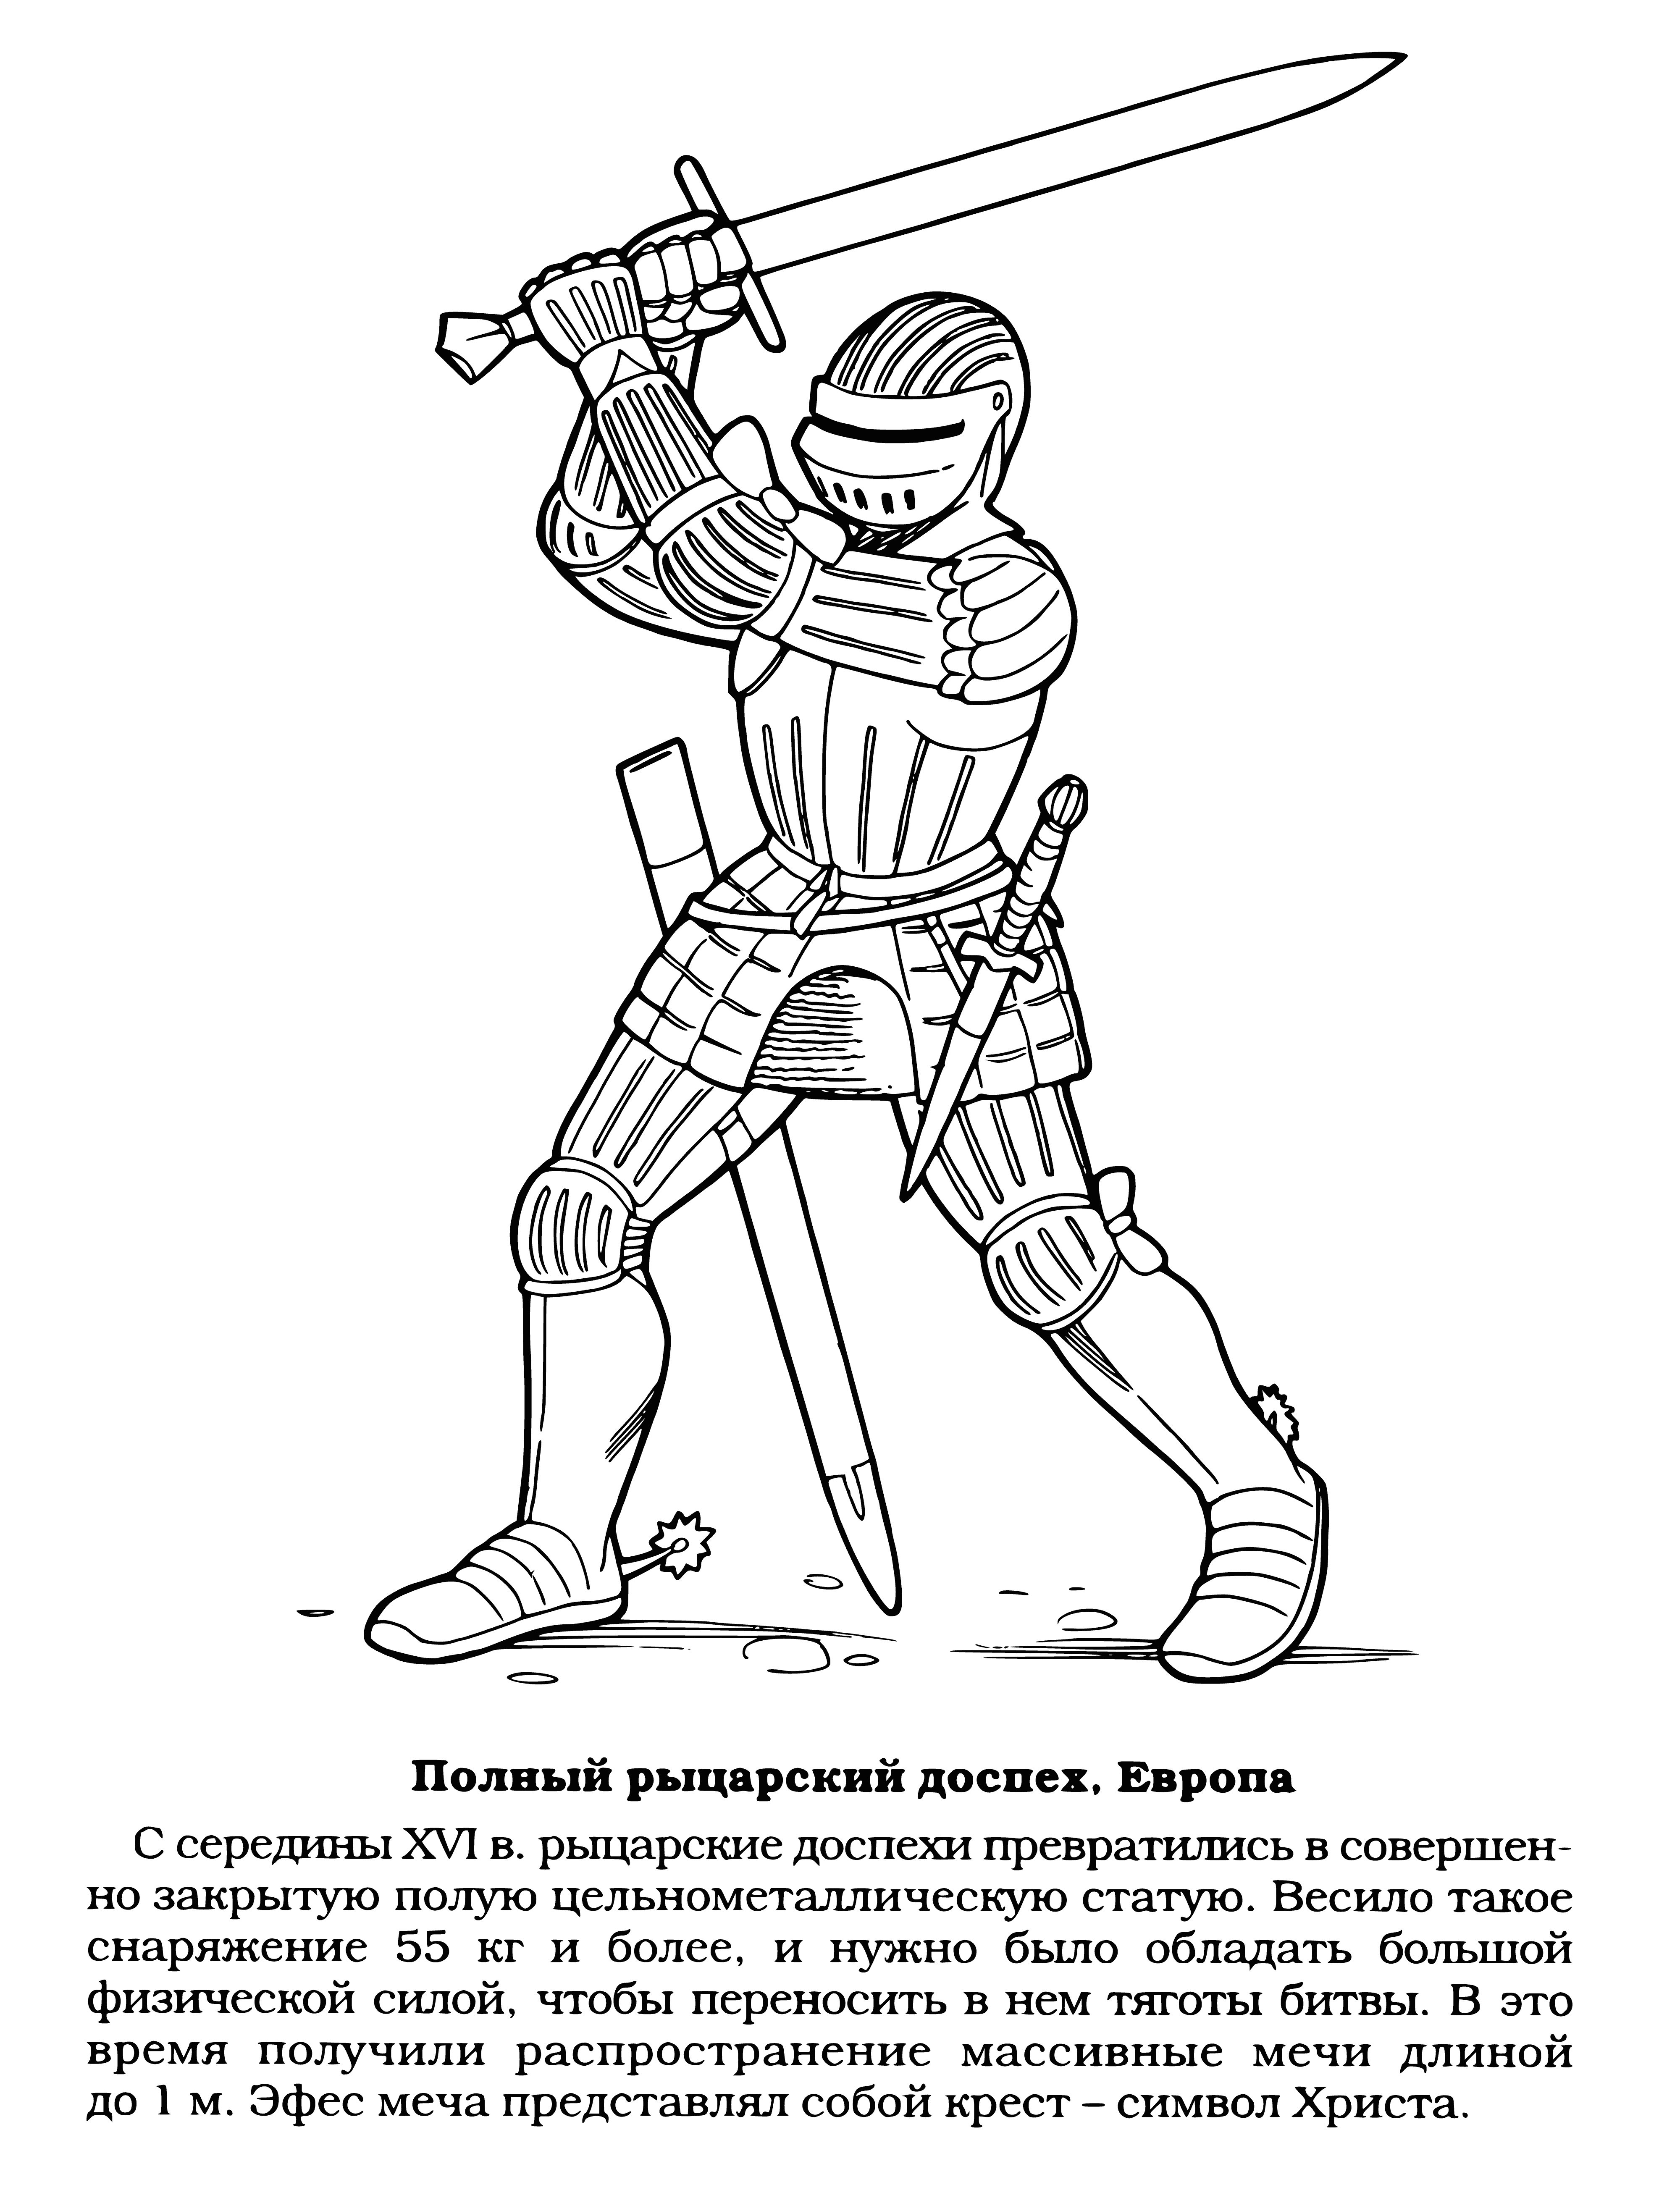 coloring page: A knight in armor w/ a two-handed sword stands b4 a group of warriors, knights & soldiers, ready to lead them into battle.